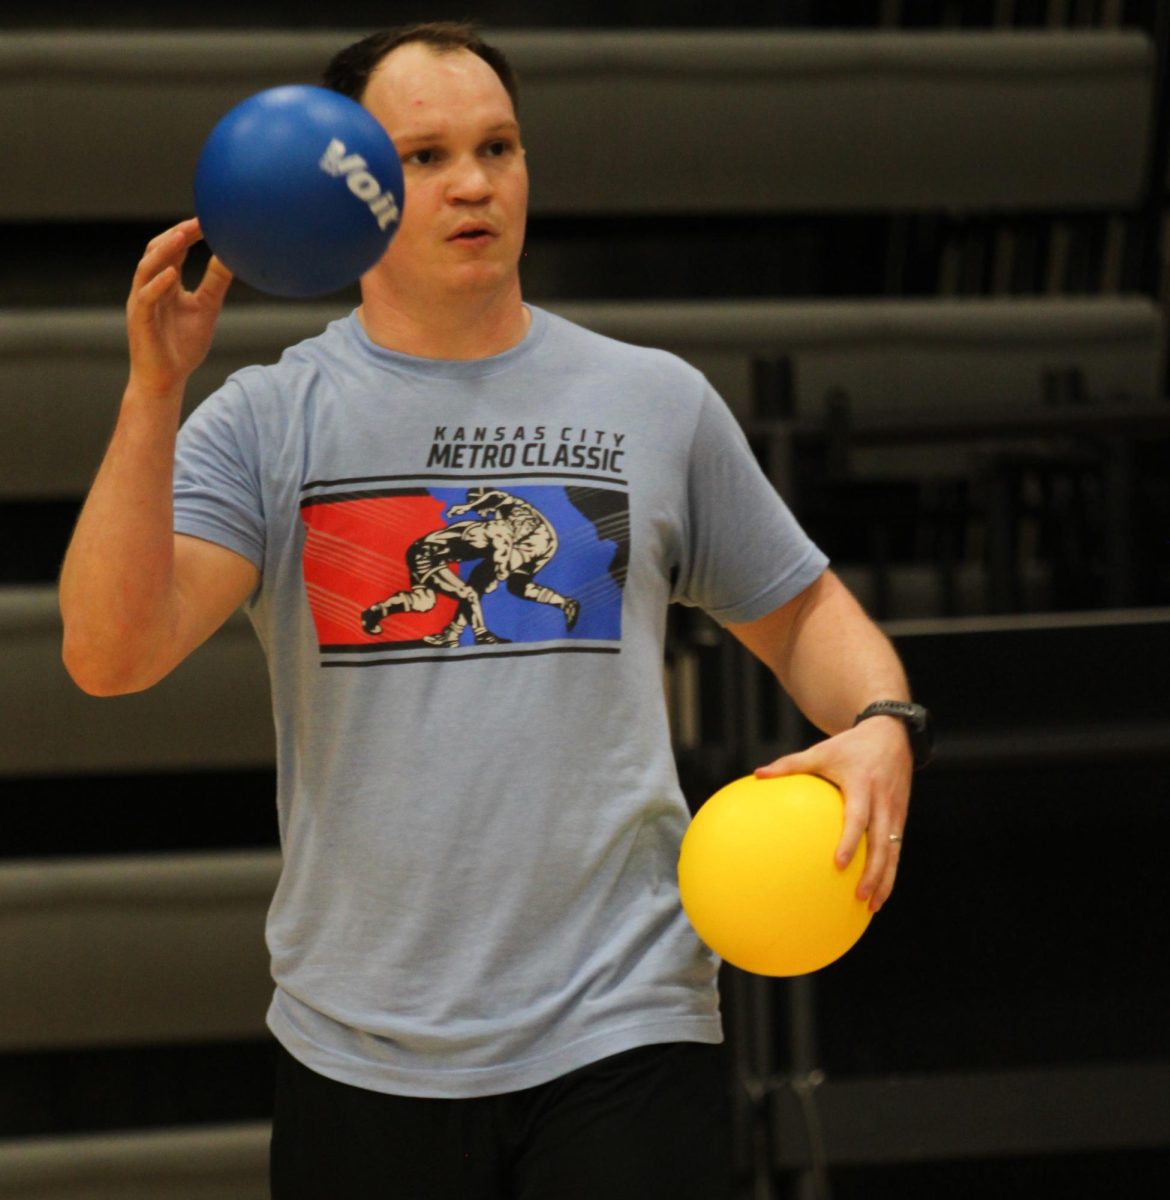 Special Education teacher Zach Russman collects the balls before throwing them during a game.